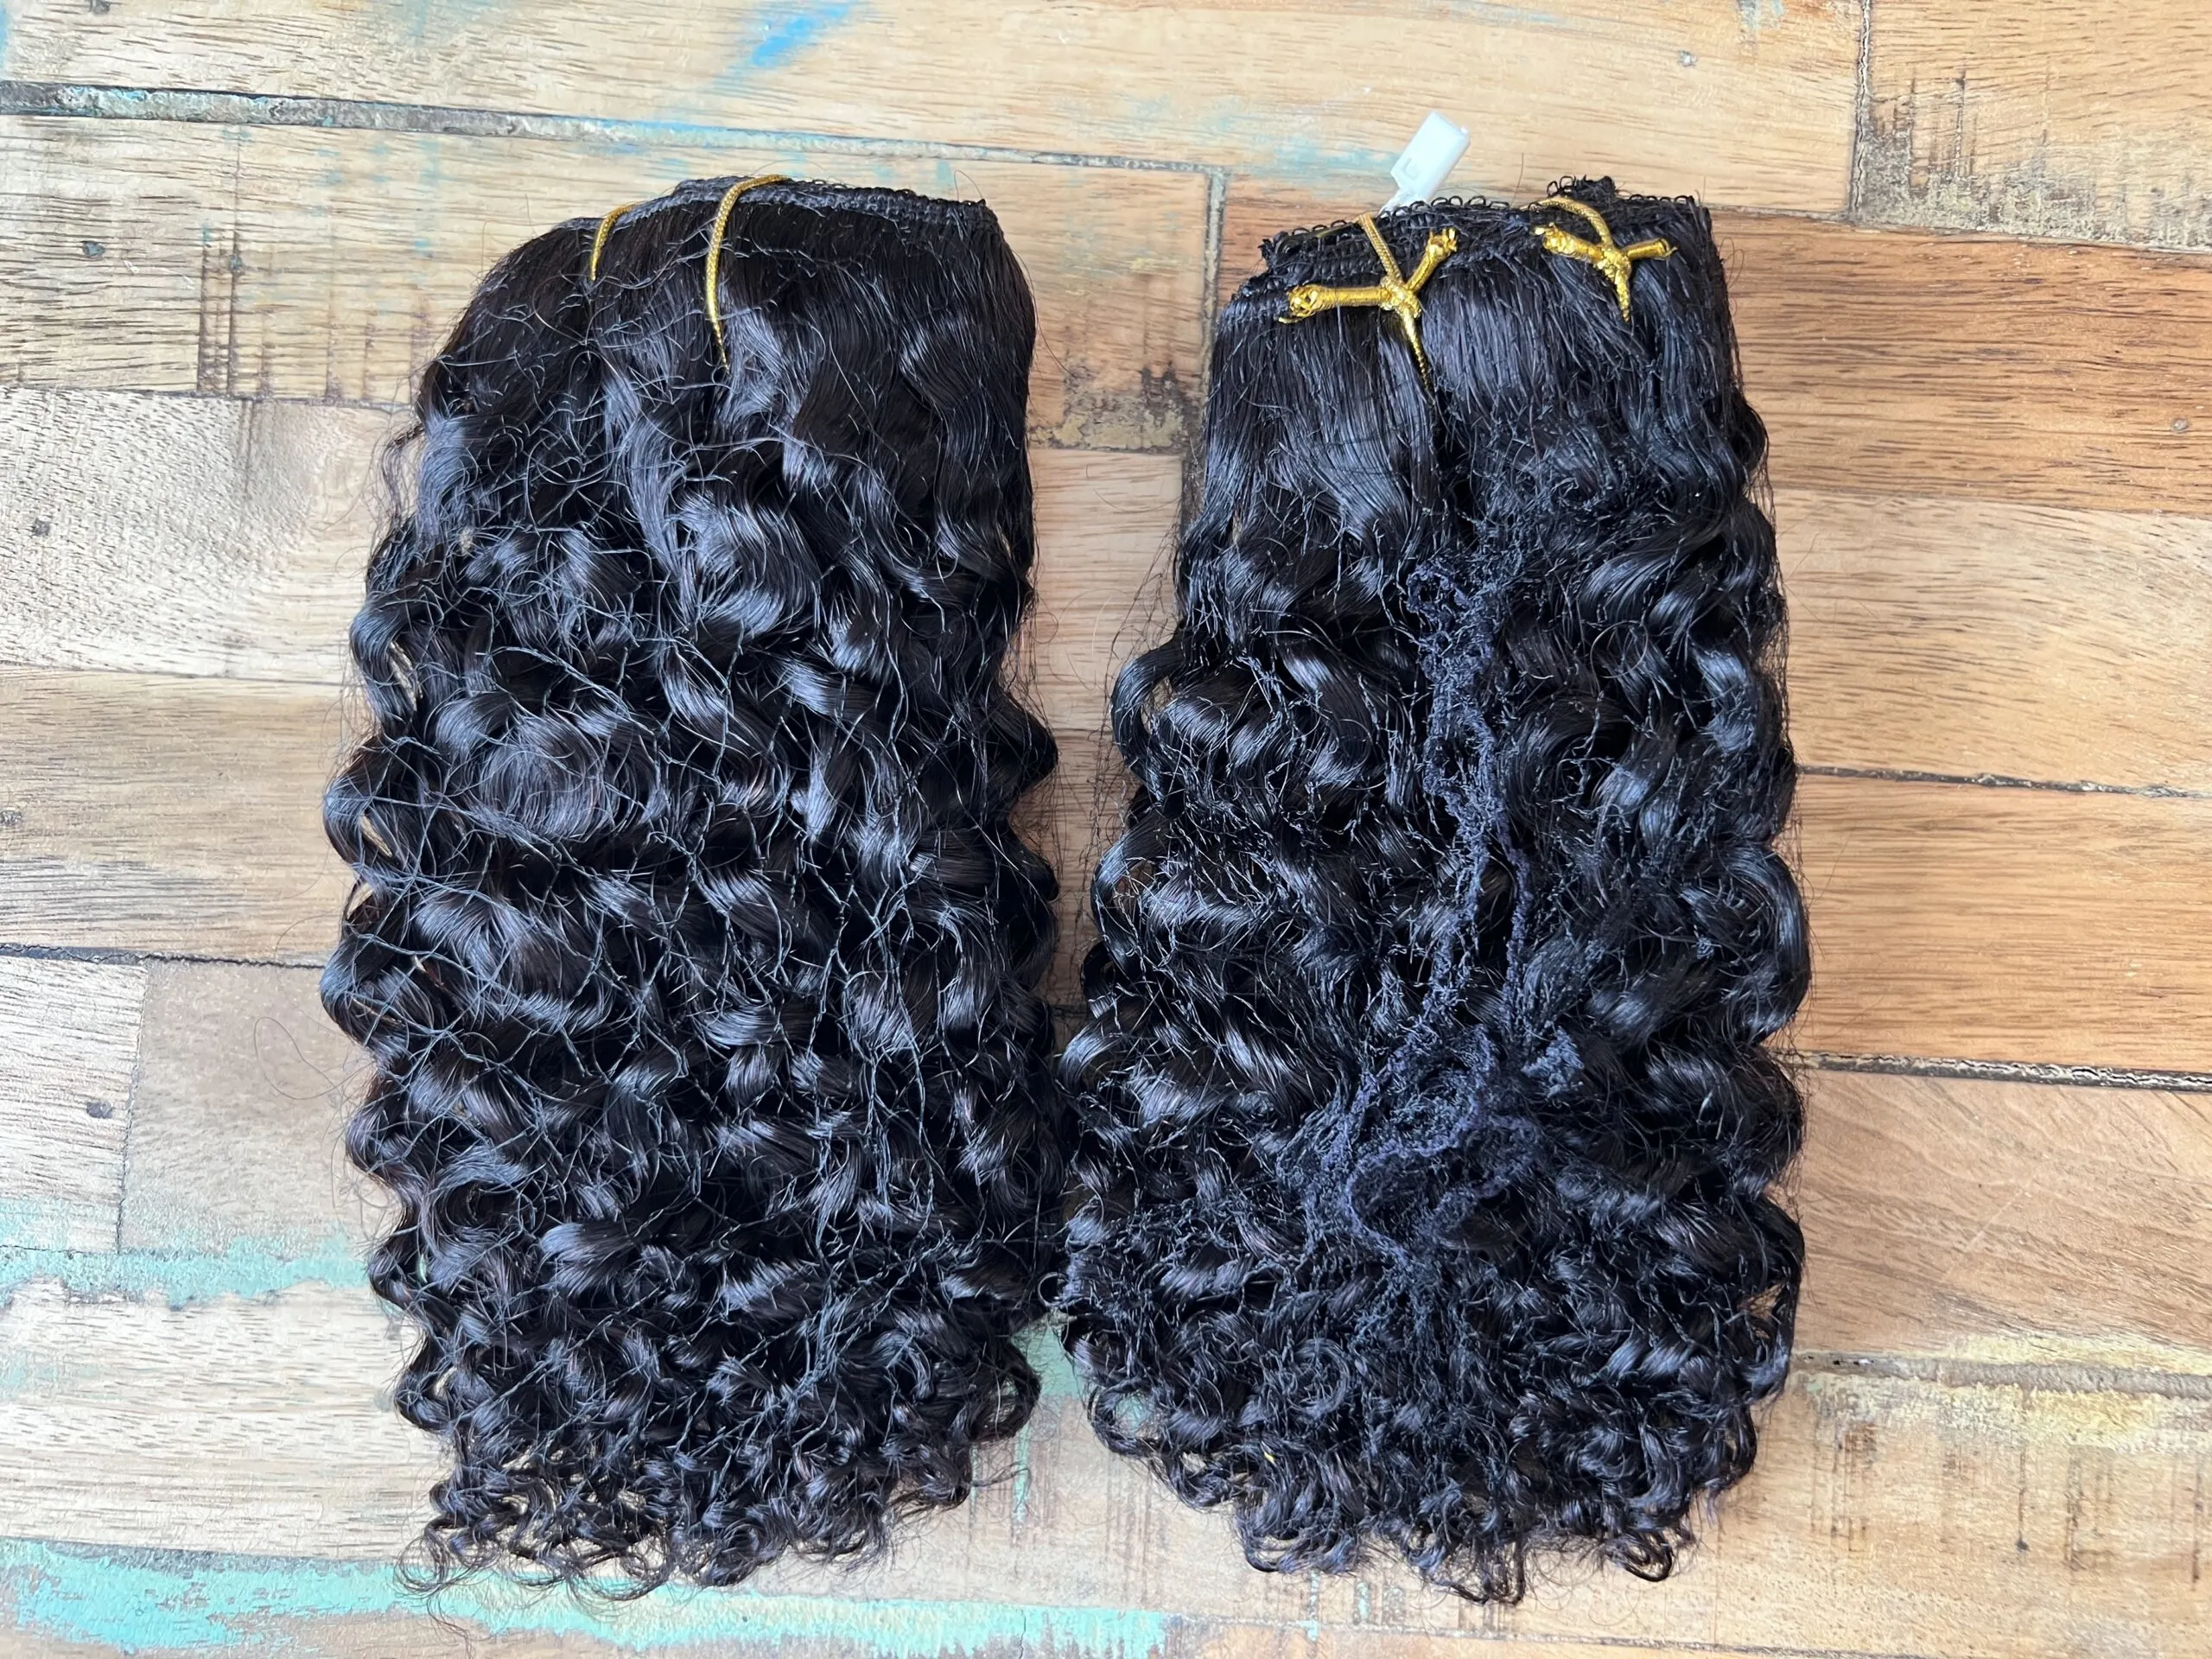 UrBeauty premium human hair arrived packaged well with minimal shedding, and it's a perfect match for ladies with very dark brown or black type 3 hair strands.